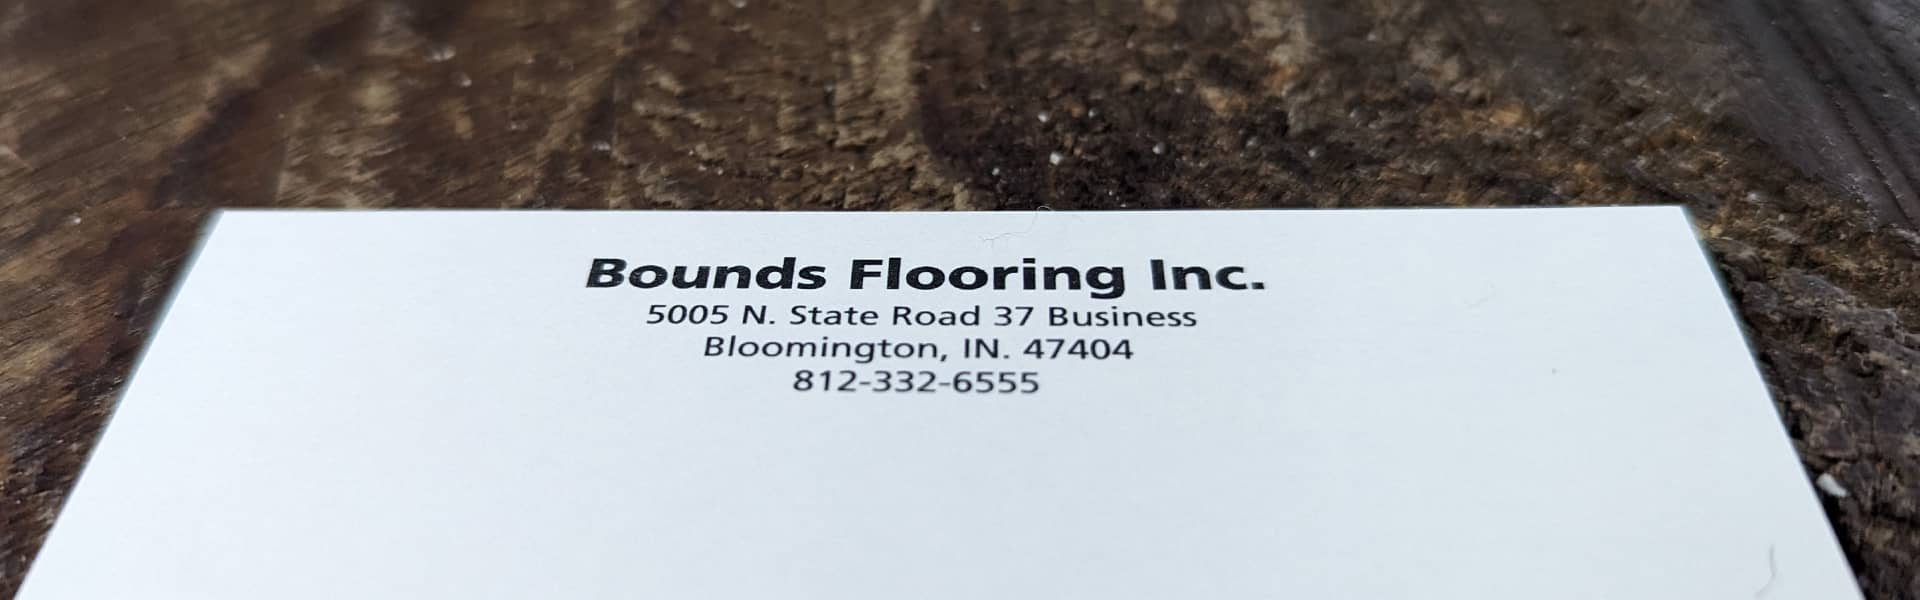 Bounds Flooring Inc. business card displaying address and contact information.